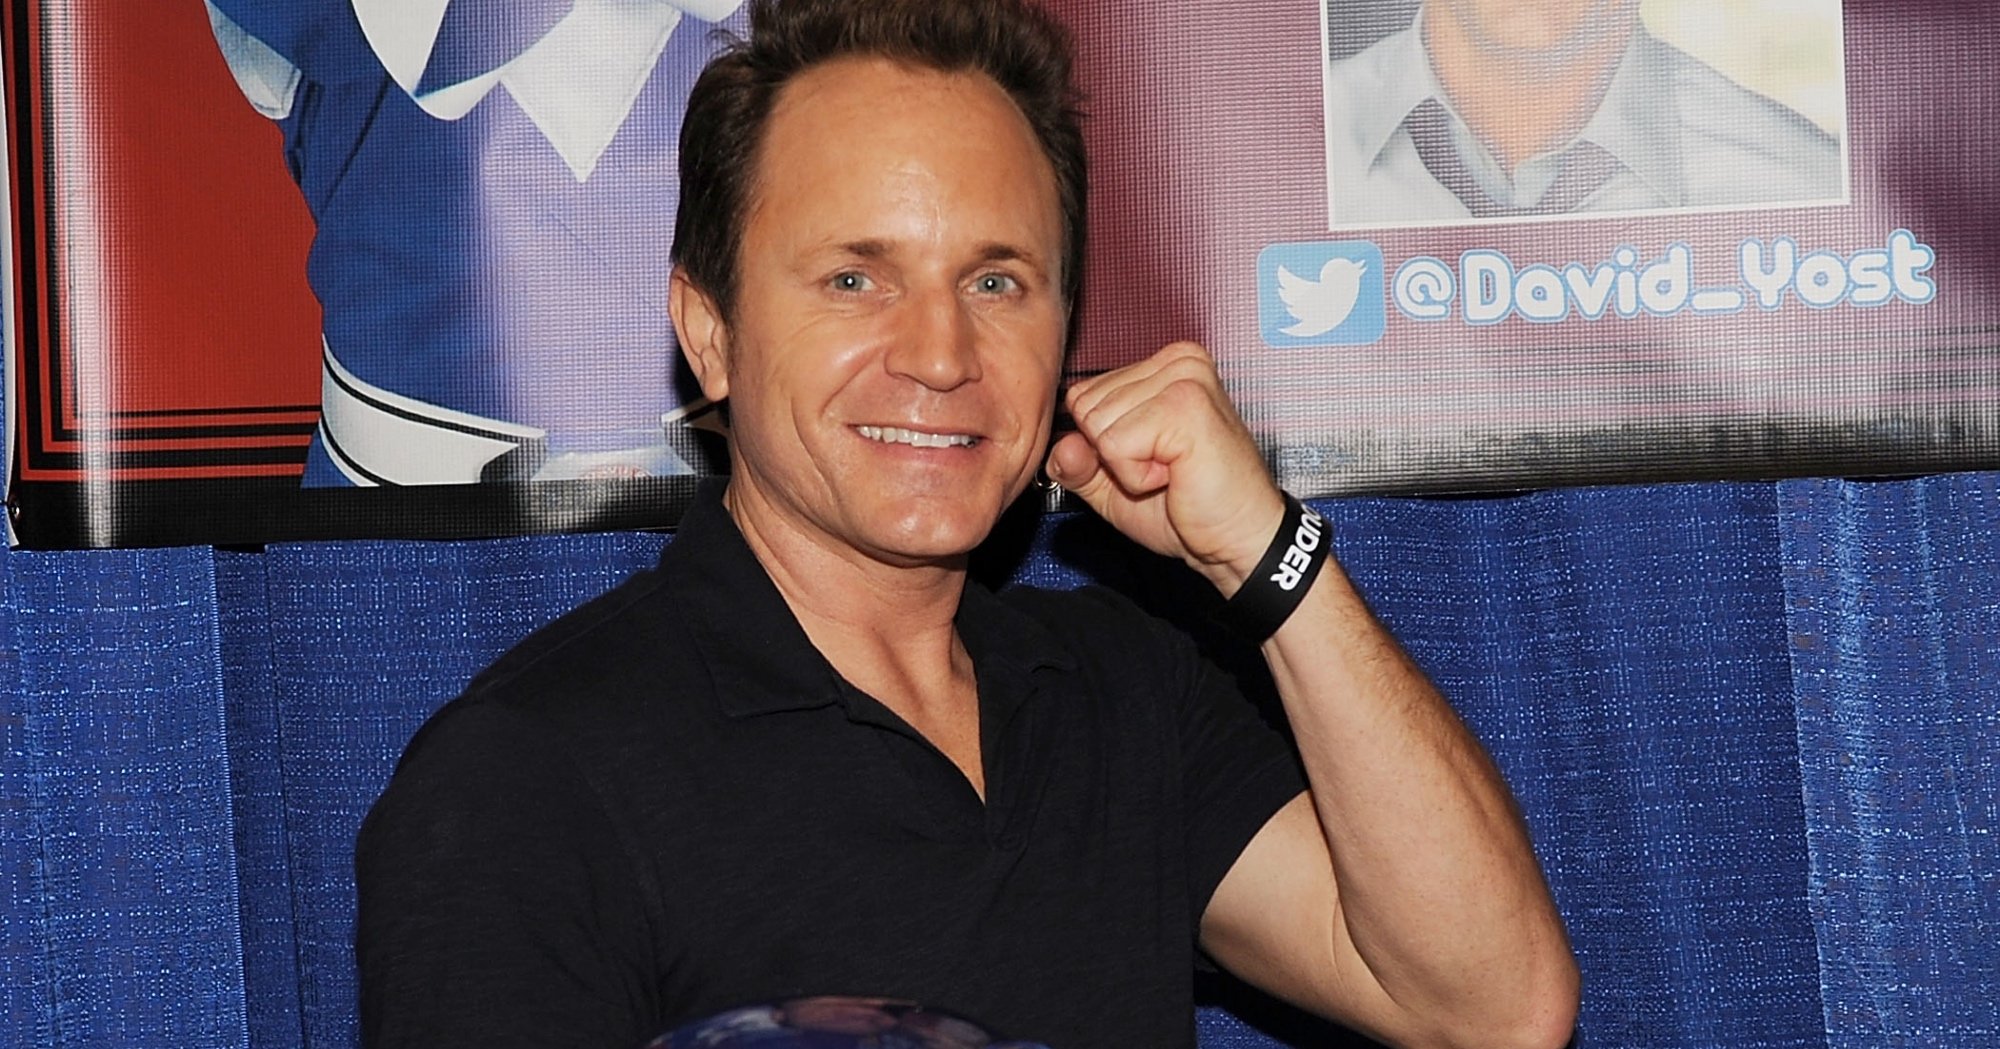 David Yost as Blue Ranger for 'Mighty Morphin Power Rangers' holding helmet and in fighting stance.